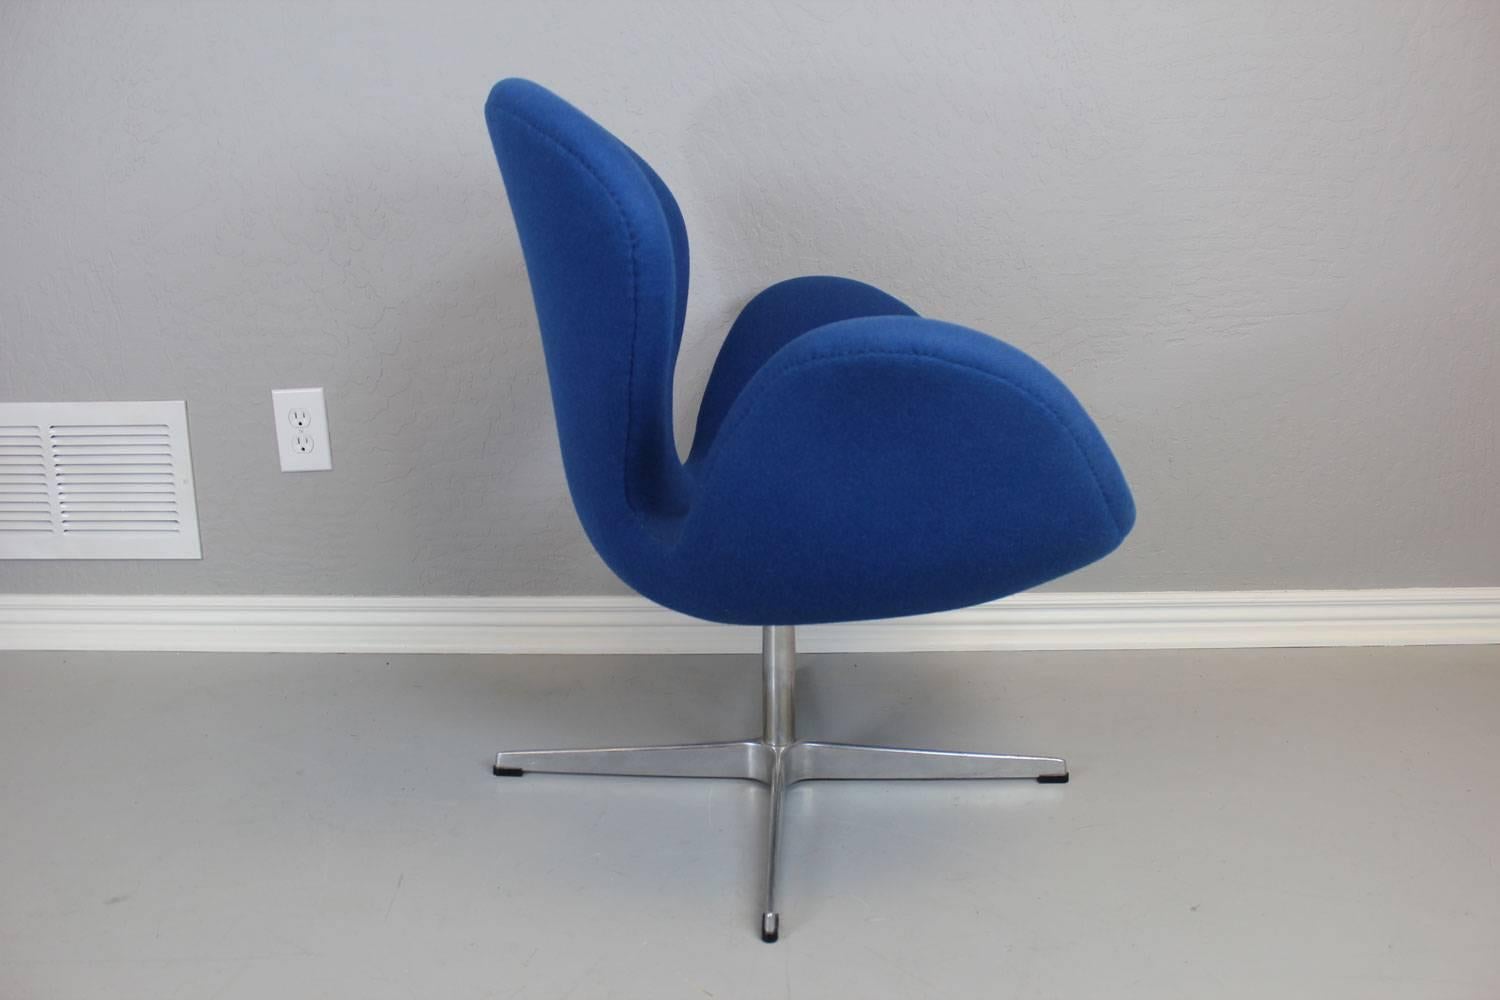 Arne Jacobsen designed swan chair manufactured by Fritz Hansen in Denmark. Original bright blue wool upholstery on an aluminium spindle foot print. Includes Fritz Hansen "Made in Demark" tag.